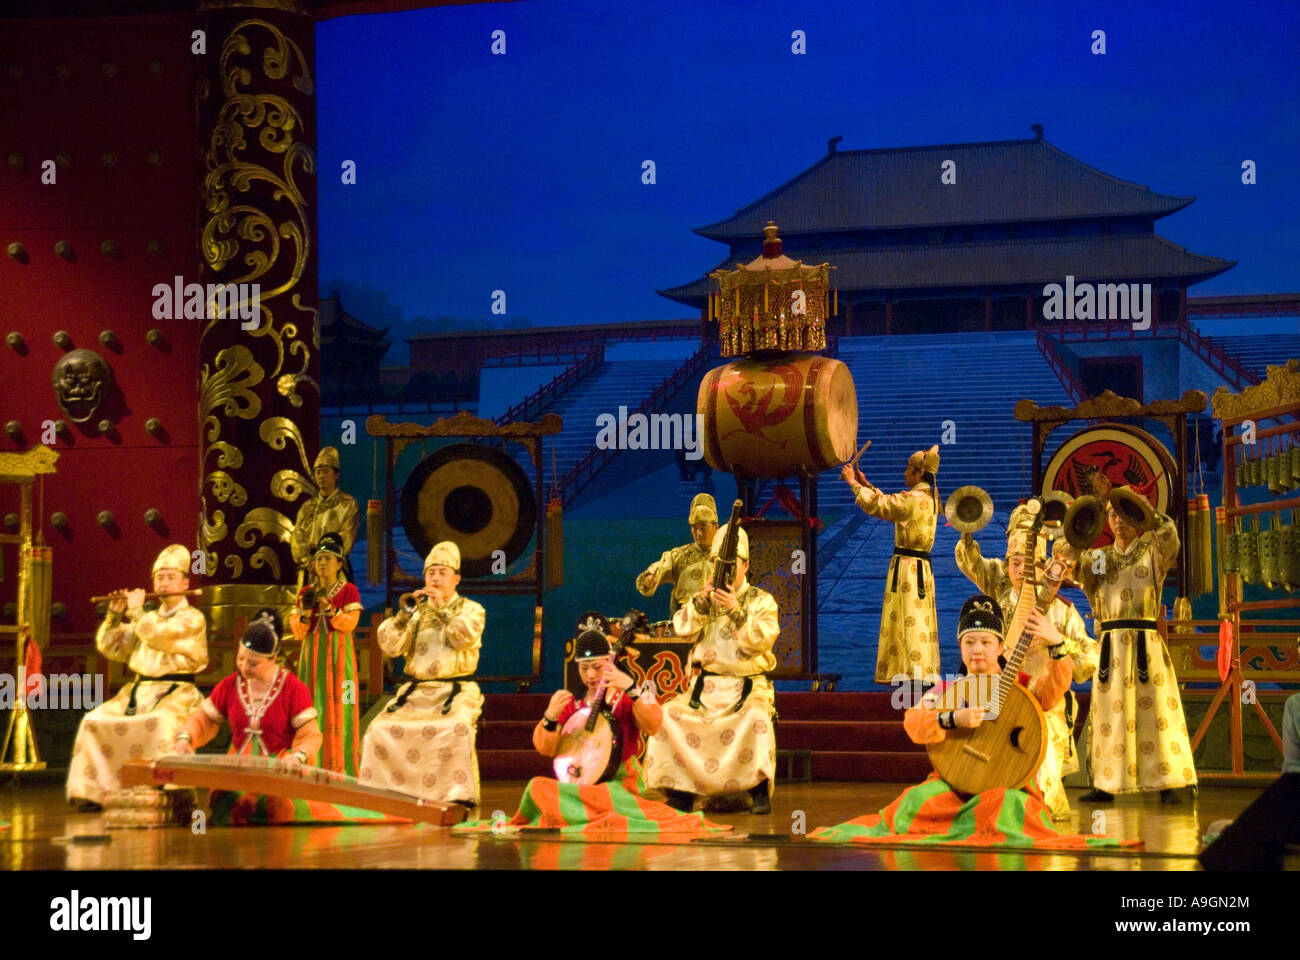 Musicians on stage at Tang dynasty performance of The Silk Road in Xi'an, China Stock Photo